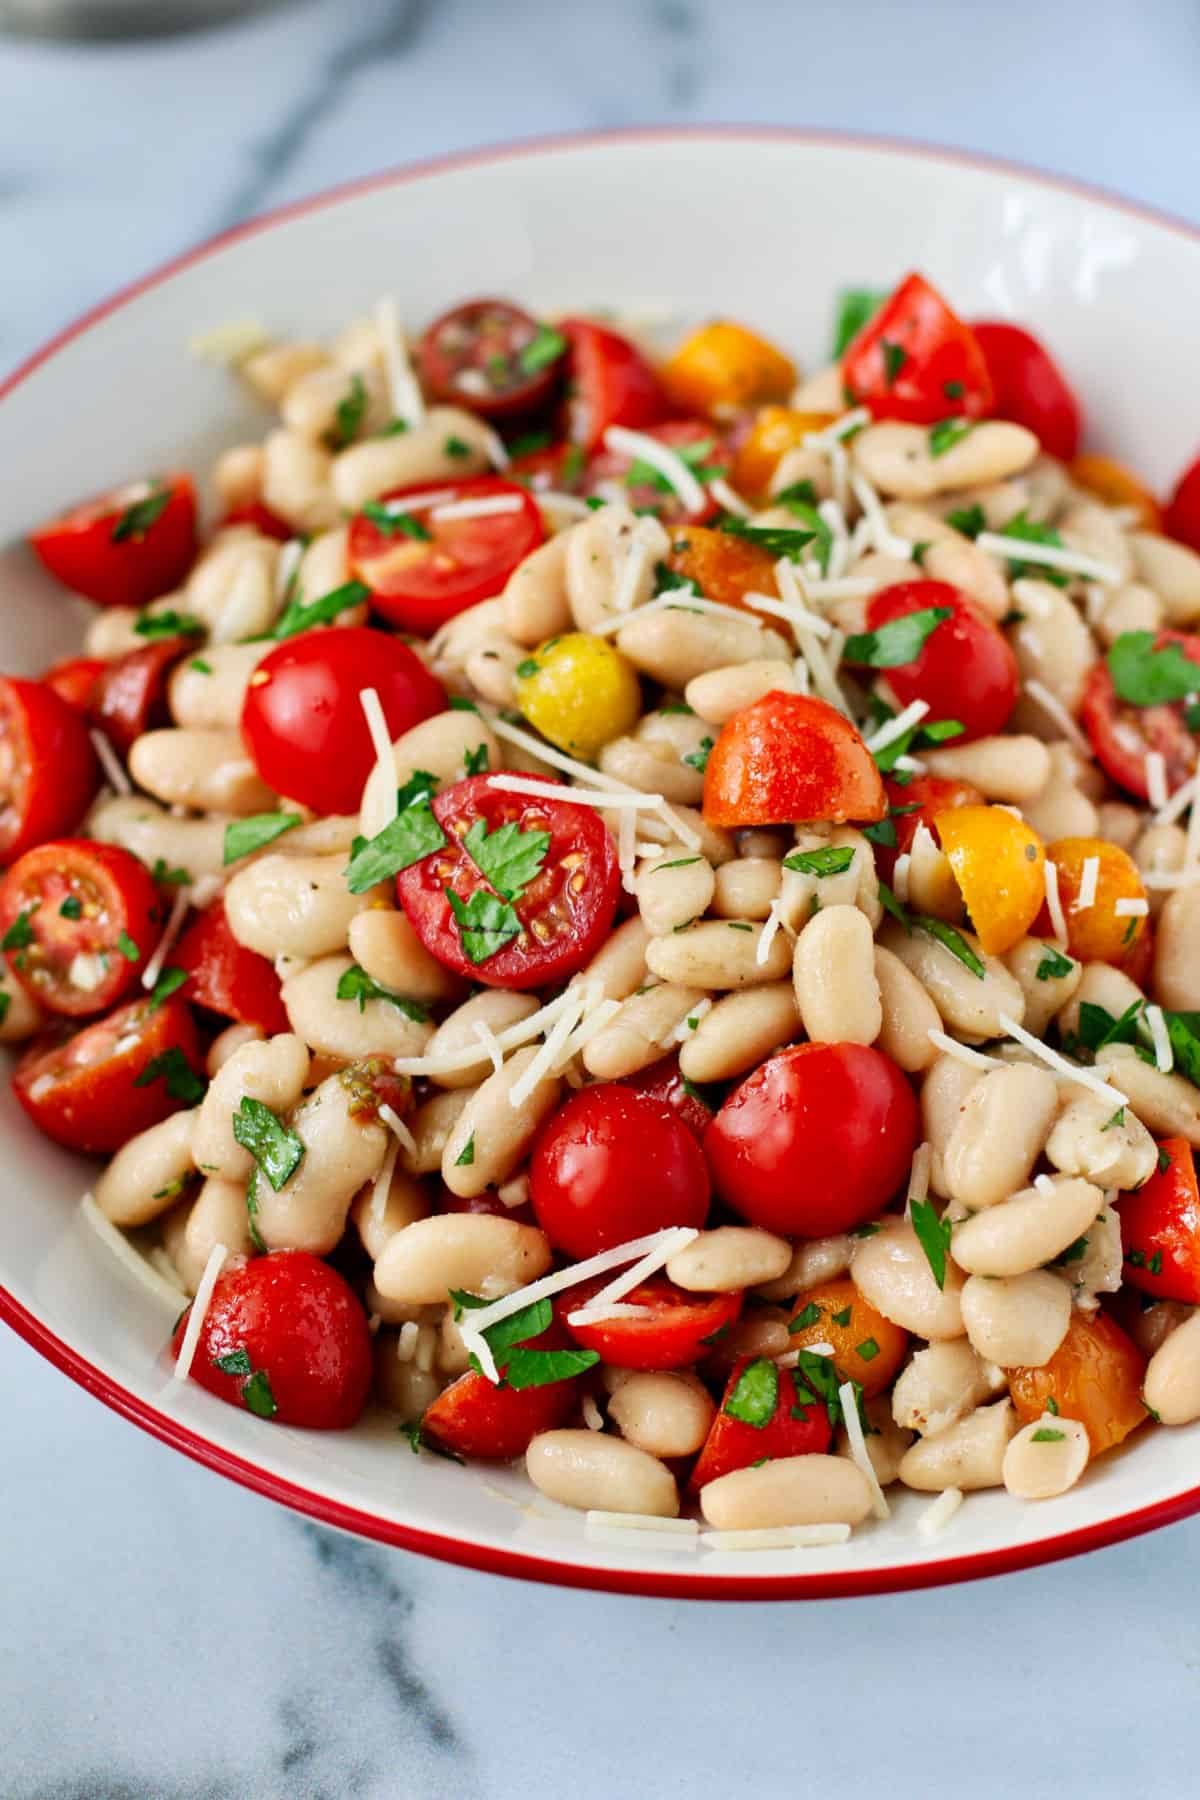 White Bean and Cherry Tomato Salad with Parsley Vinaigrette in a large bowl.